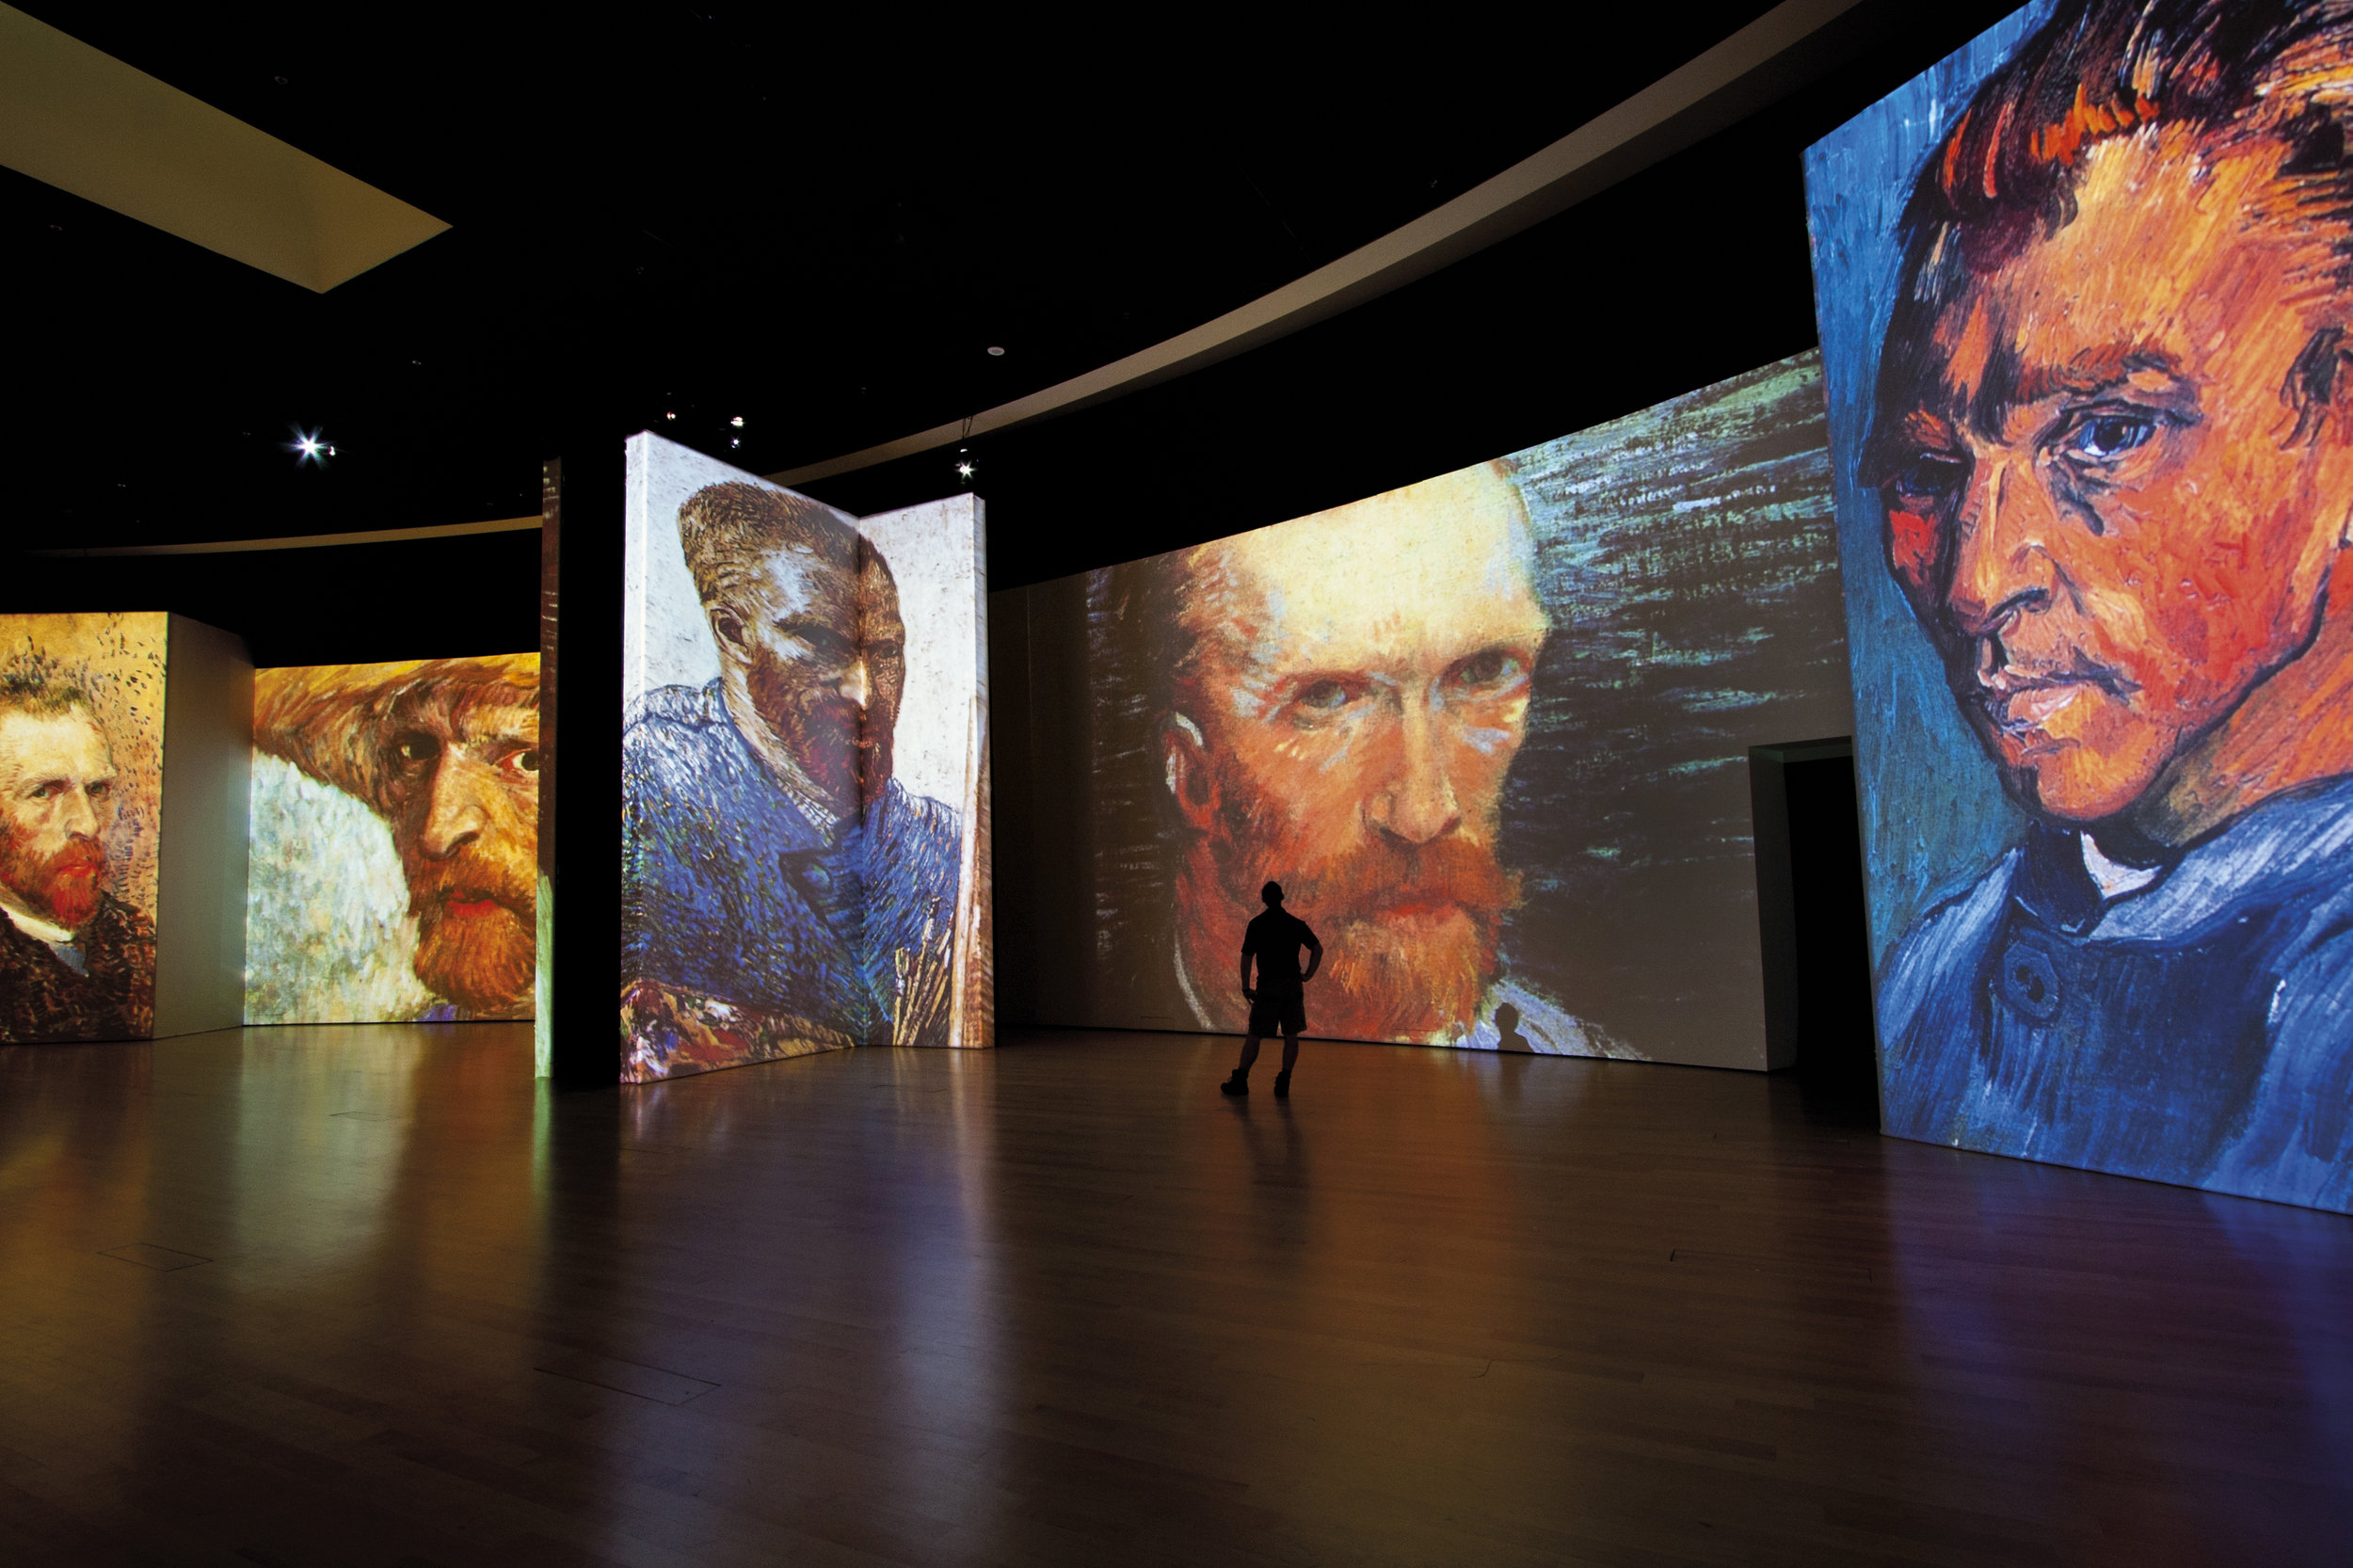  A collection of Van Gogh's many self portraits seen as larger than life in the multi-sensory exhibition of images and sound. 